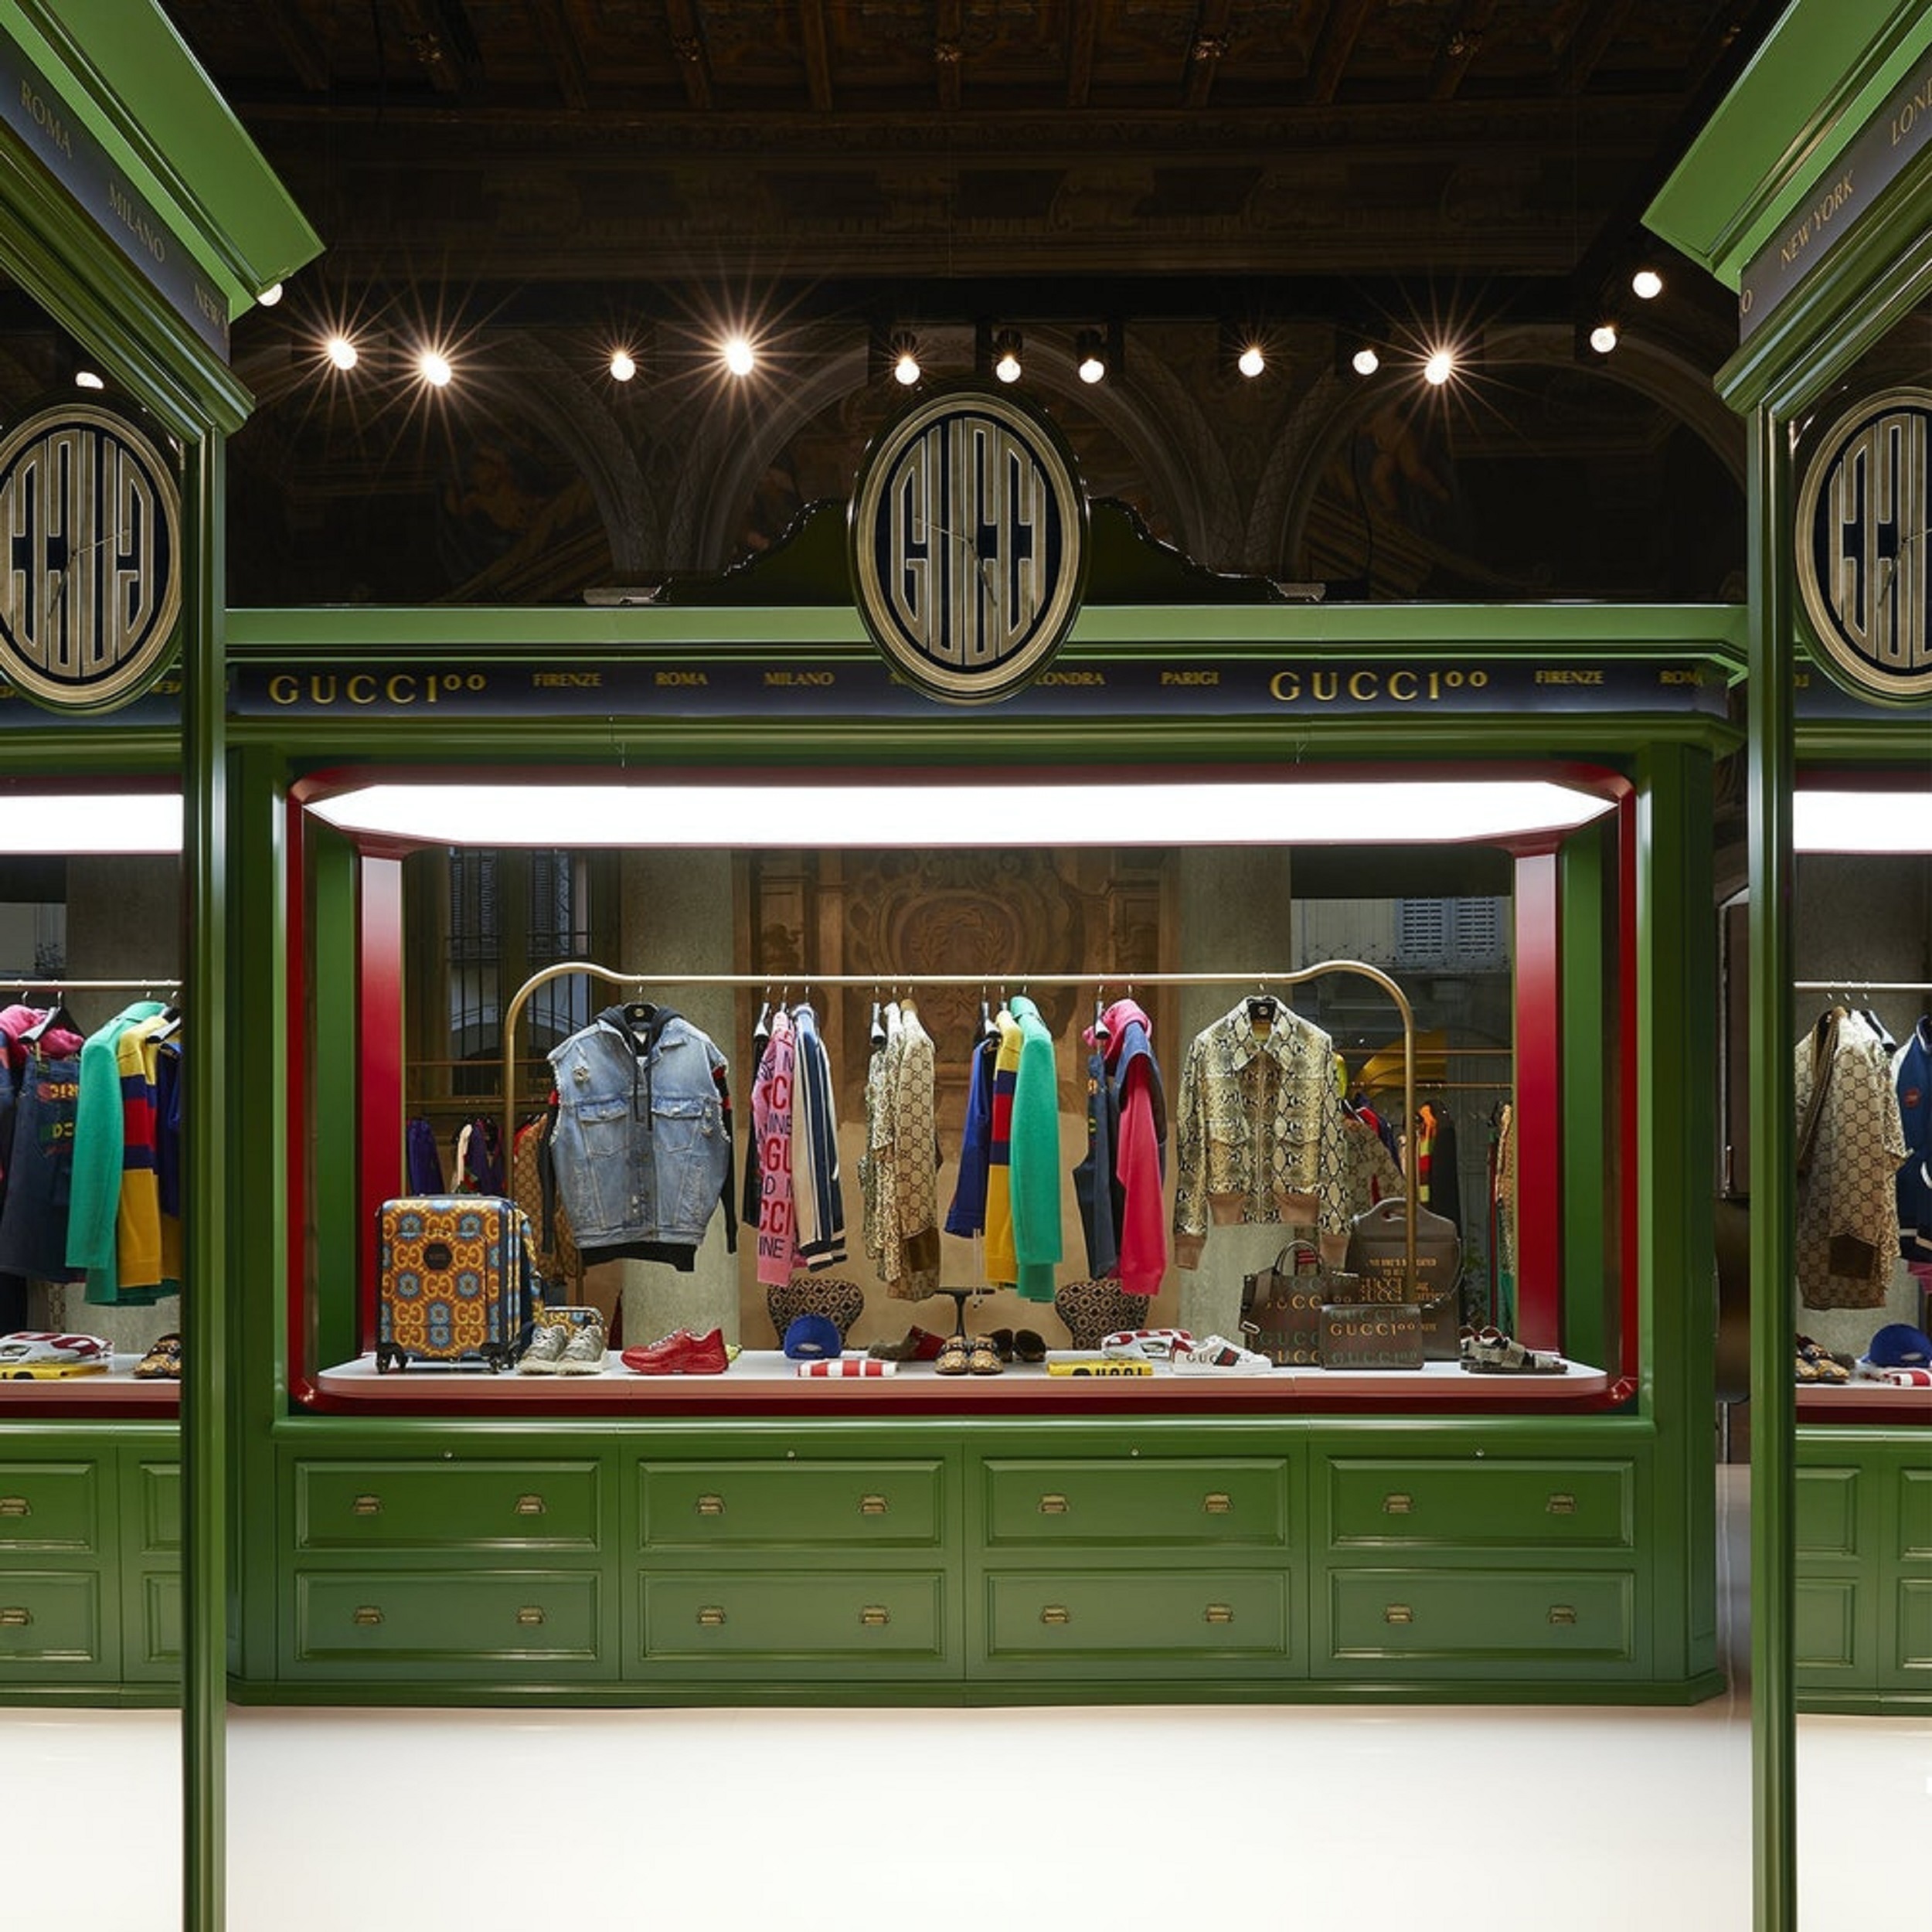 How Louis Vuitton Won Me Over with Experiential Retail (experience